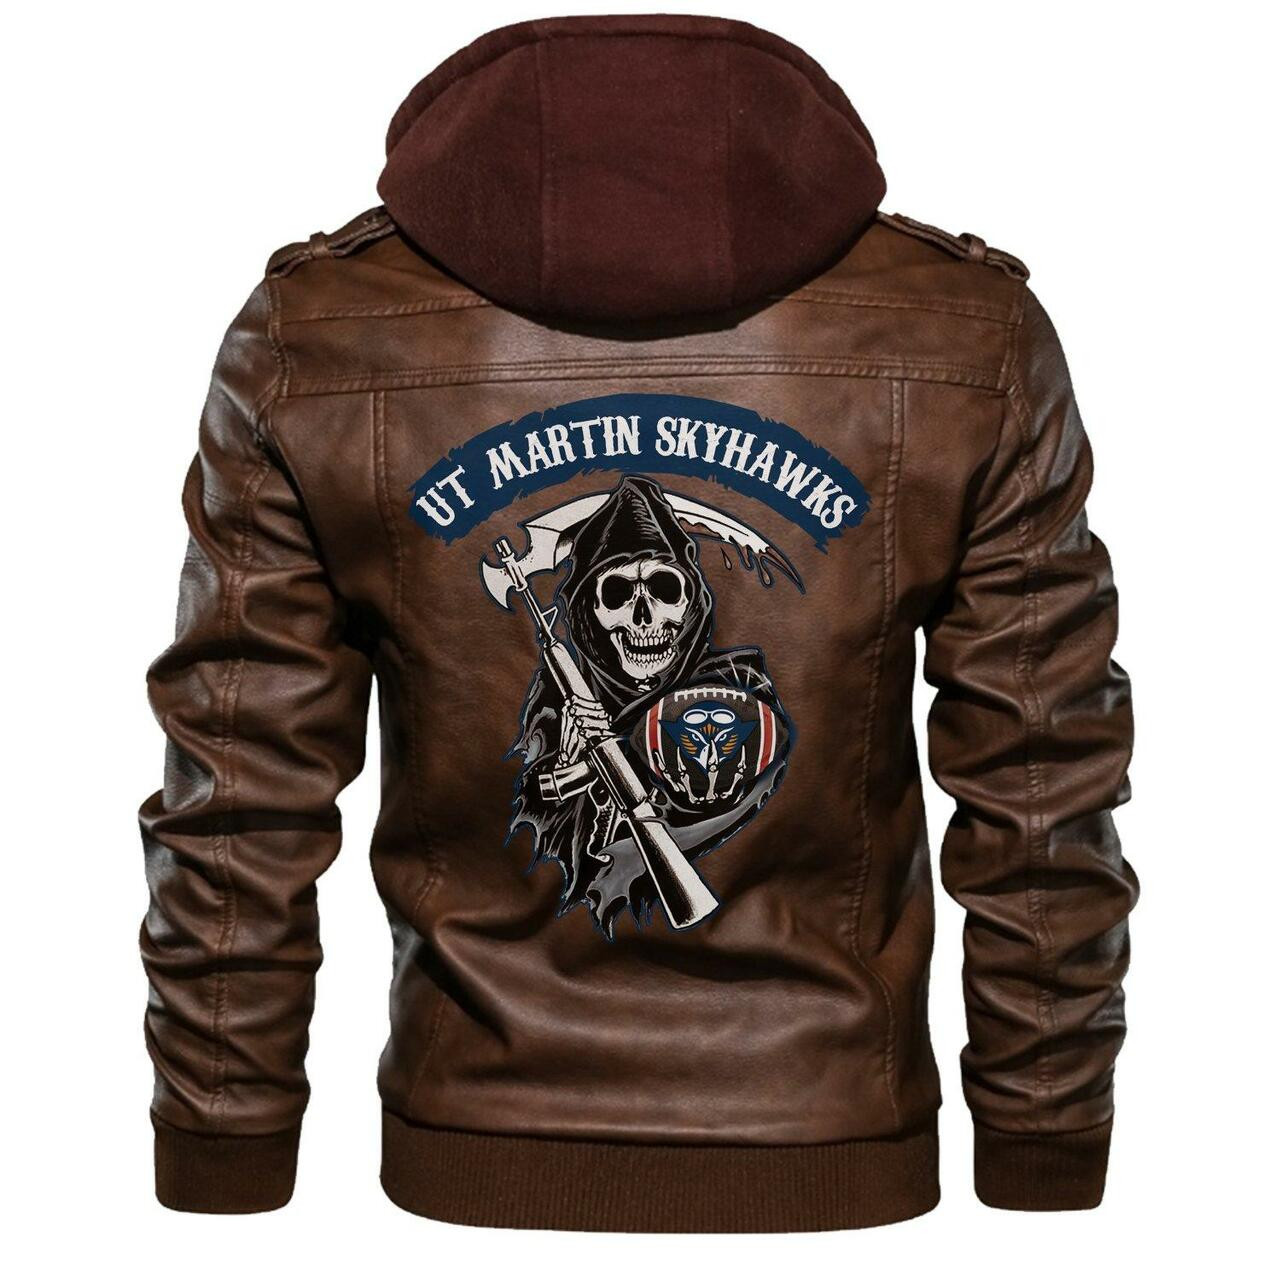 Check out and find the right leather jacket below 57